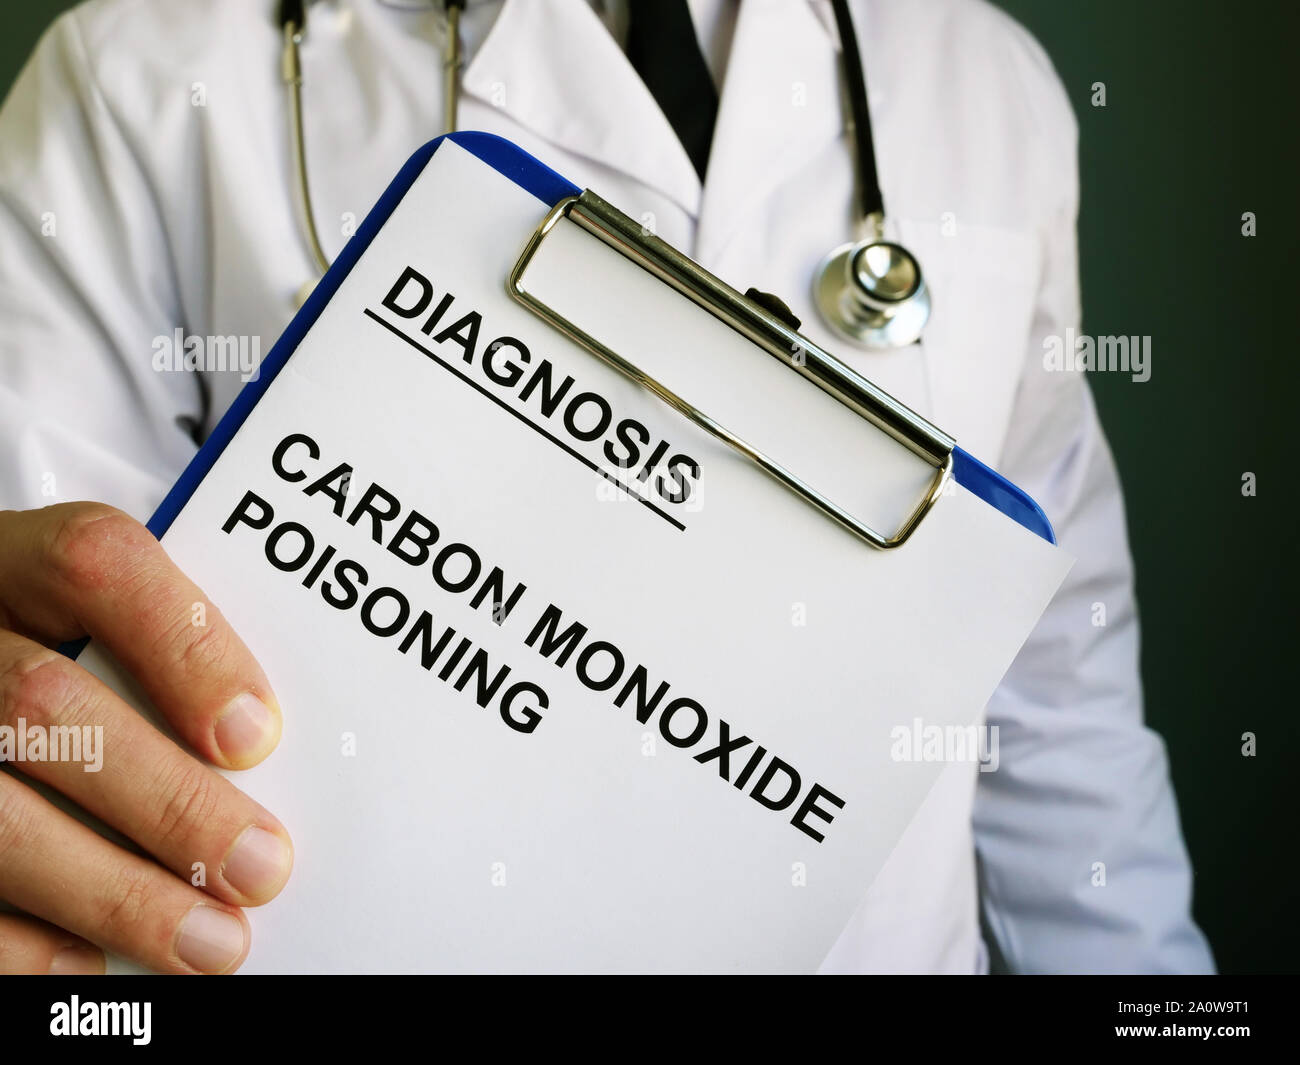 Doctor holds diagnosis Carbon monoxide poisoning. Stock Photo